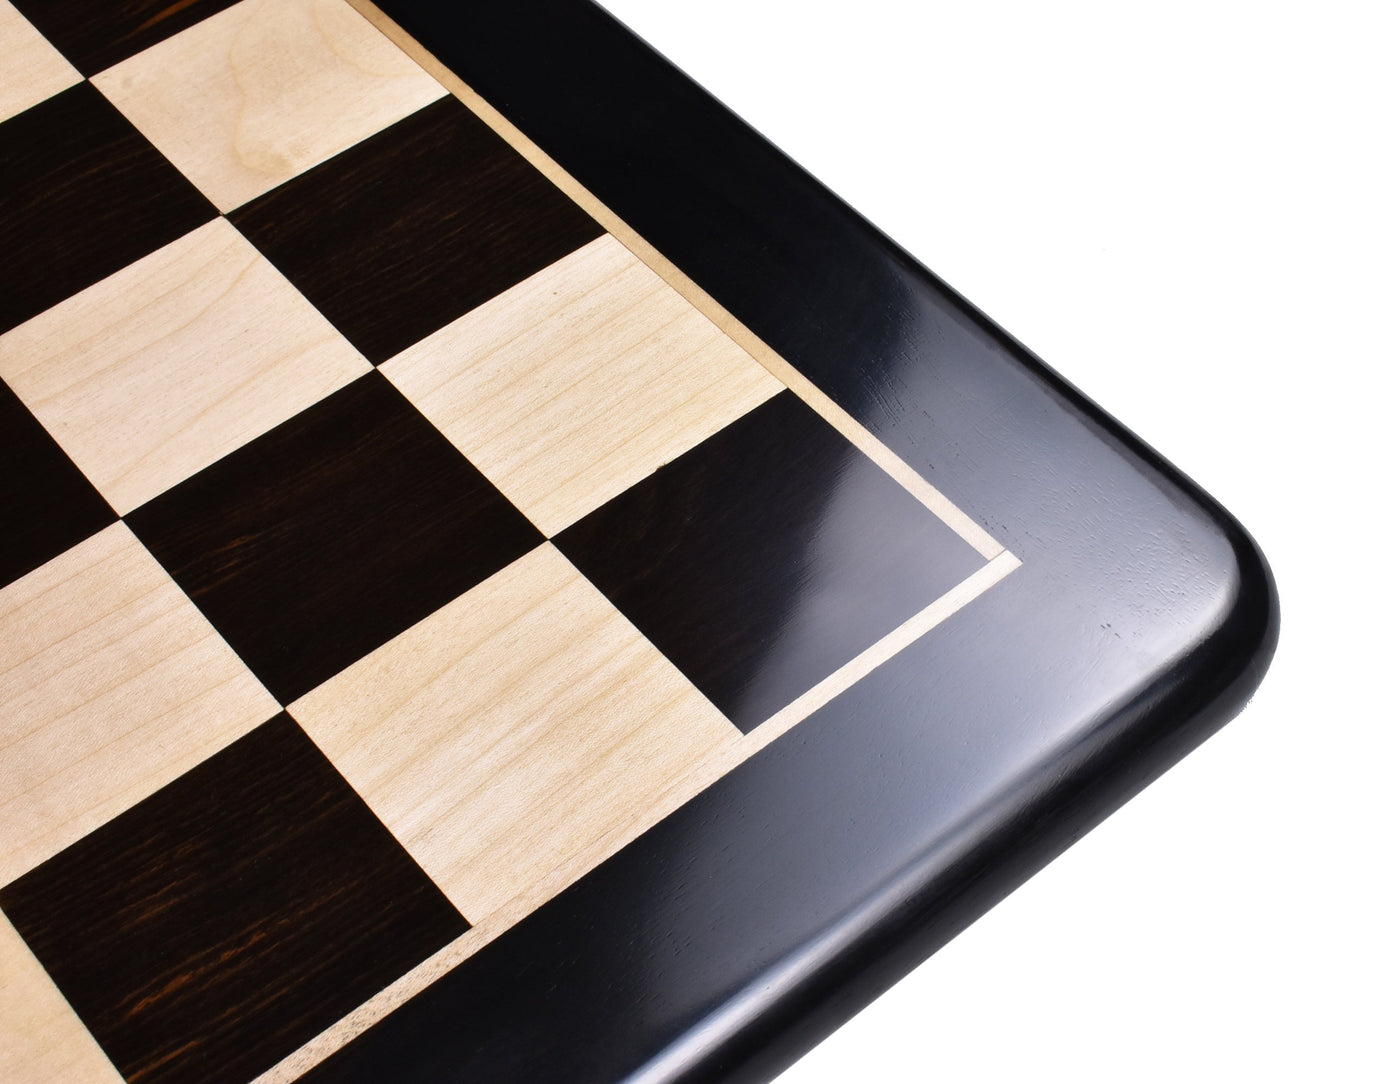 3.8" Imperial Staunton Luxury Ebony Wood Chess Pieces with 21" Large Solid Inlaid Ebony & Maple Wood Chess board